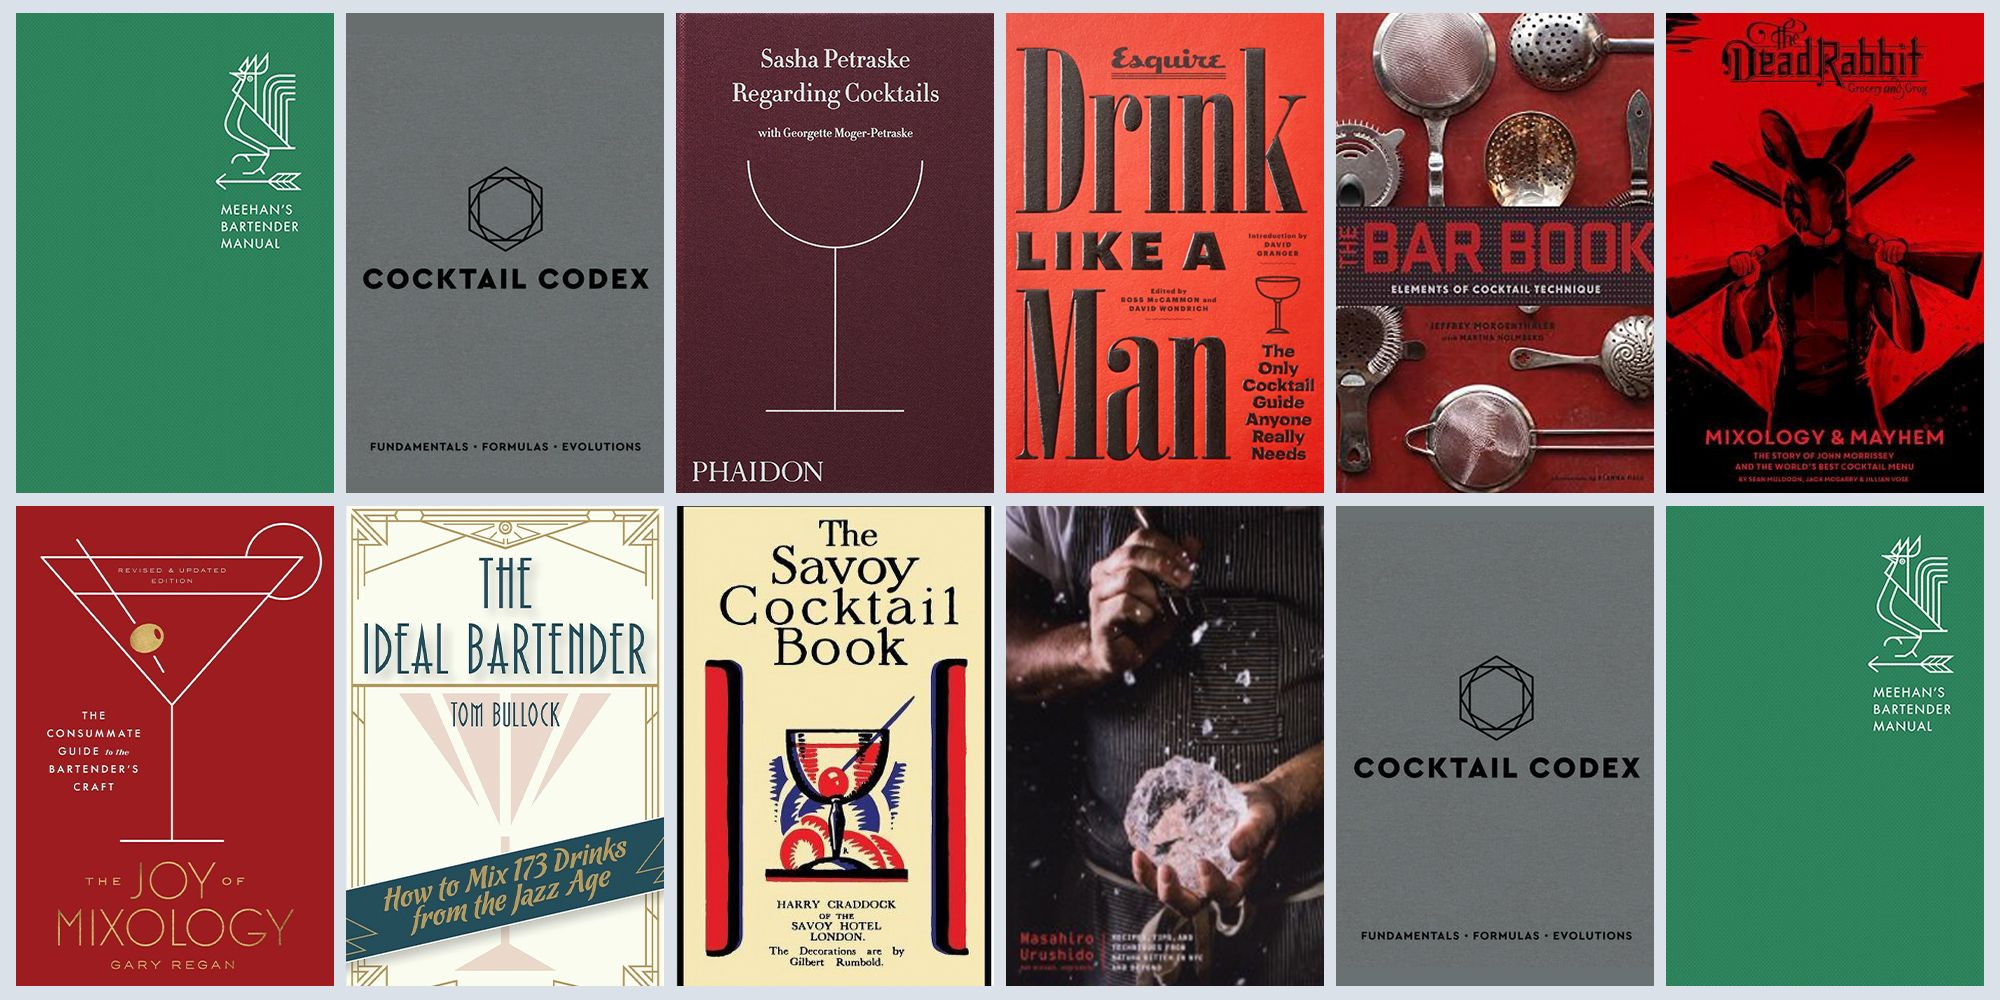 16 Best Cocktail Books 2023 - Top Cocktail Recipe Books Reviews